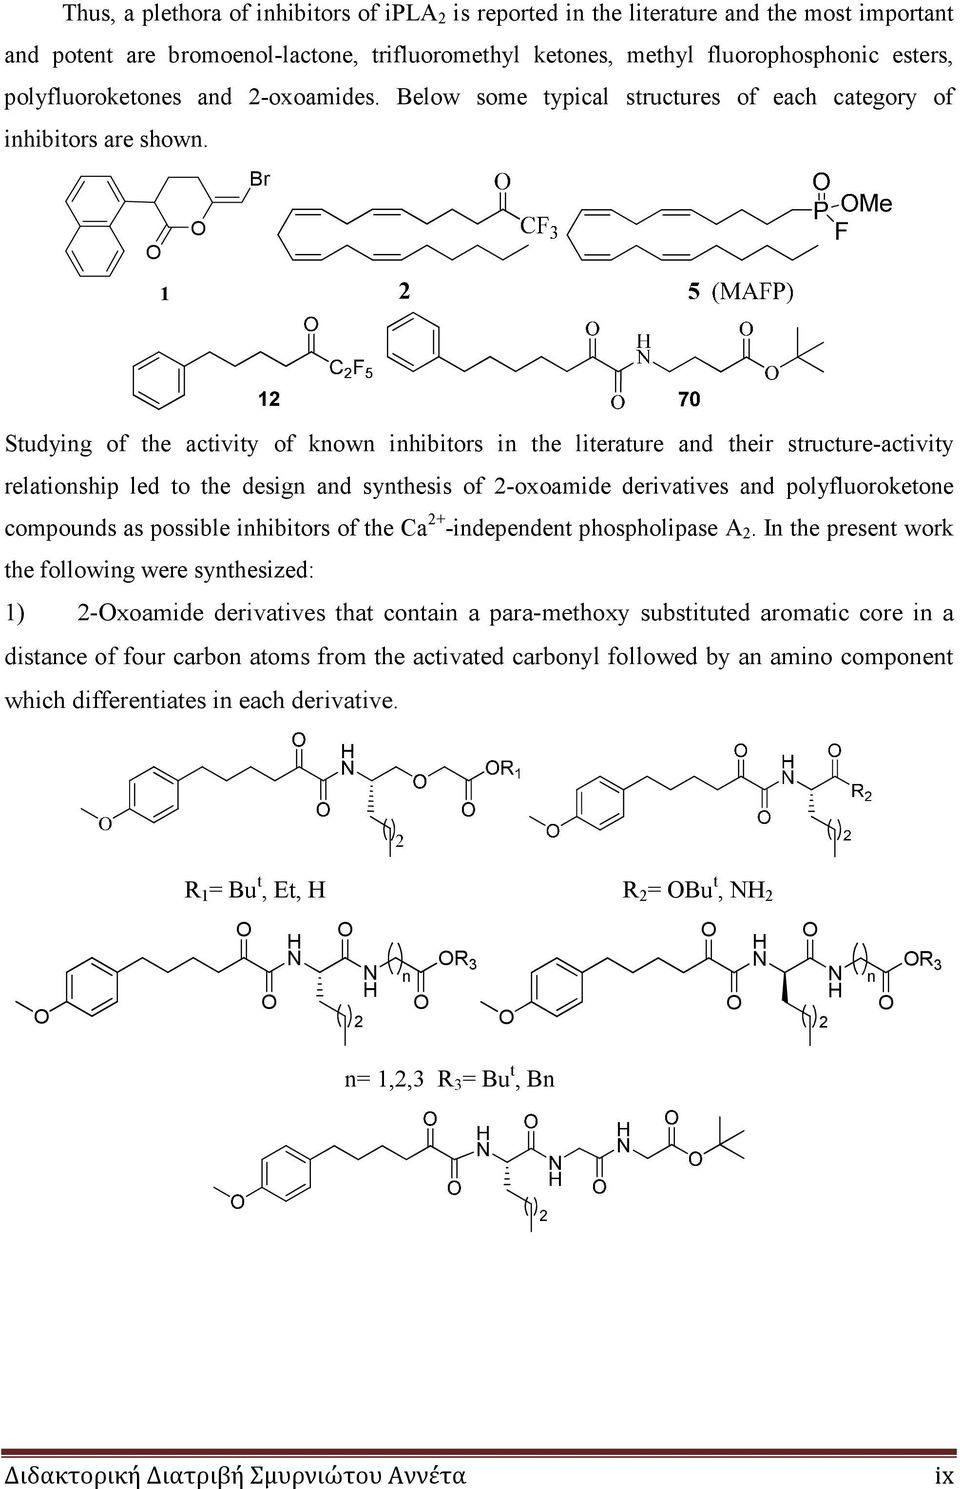 Br 1 Studying of the activity of known inhibitors in the literature and their structure-activity relationship led to the design and synthesis of 2-oxoamide derivatives and polyfluoroketone compounds